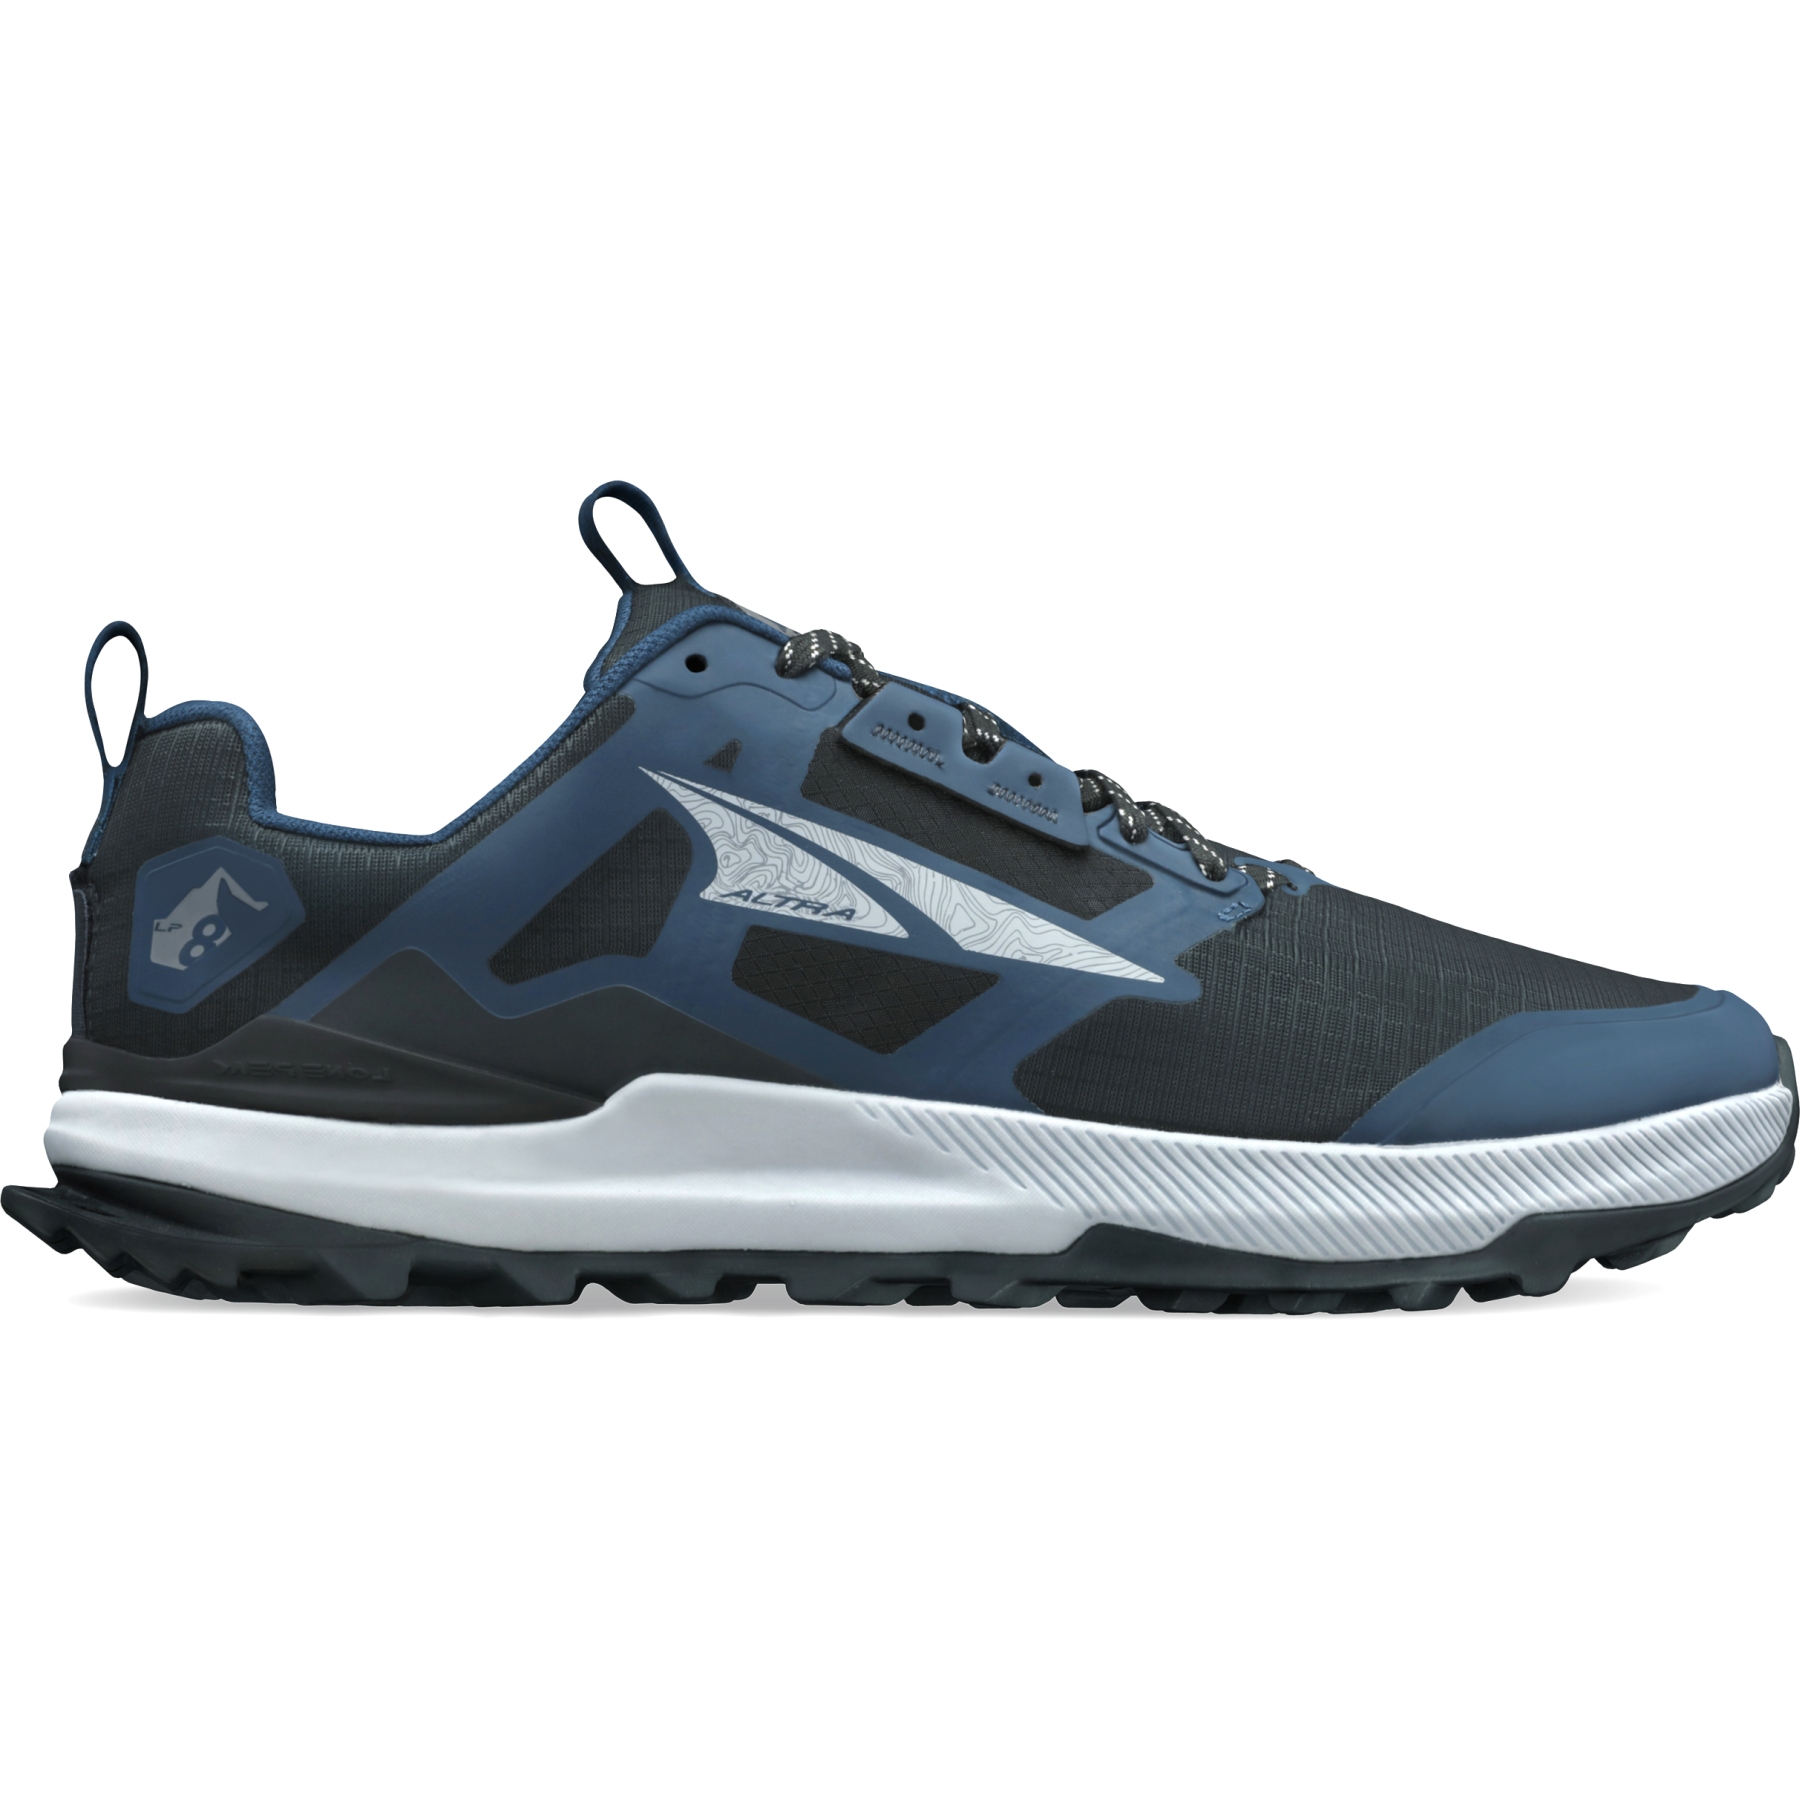 Picture of Altra Lone Peak 8 Wide Trail Running Shoes Men - Navy/Black